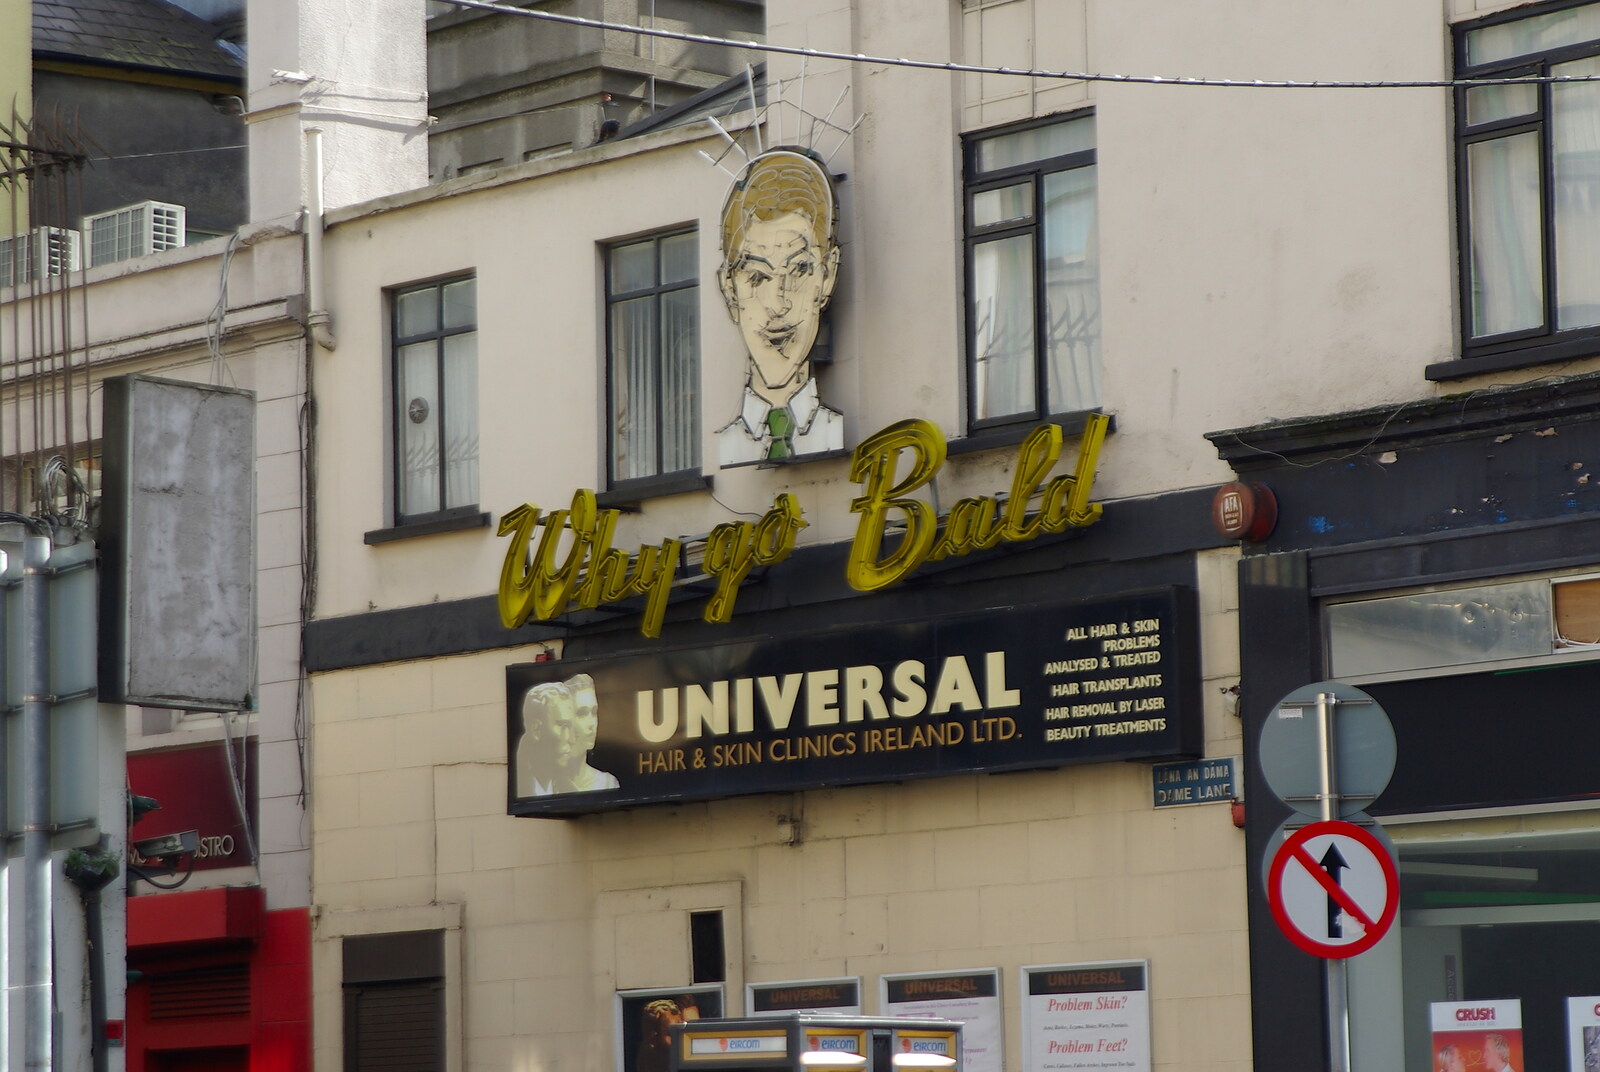 Easter in Dublin, Ireland - 21st March 2008: A cool old sign: 'Why go bald'